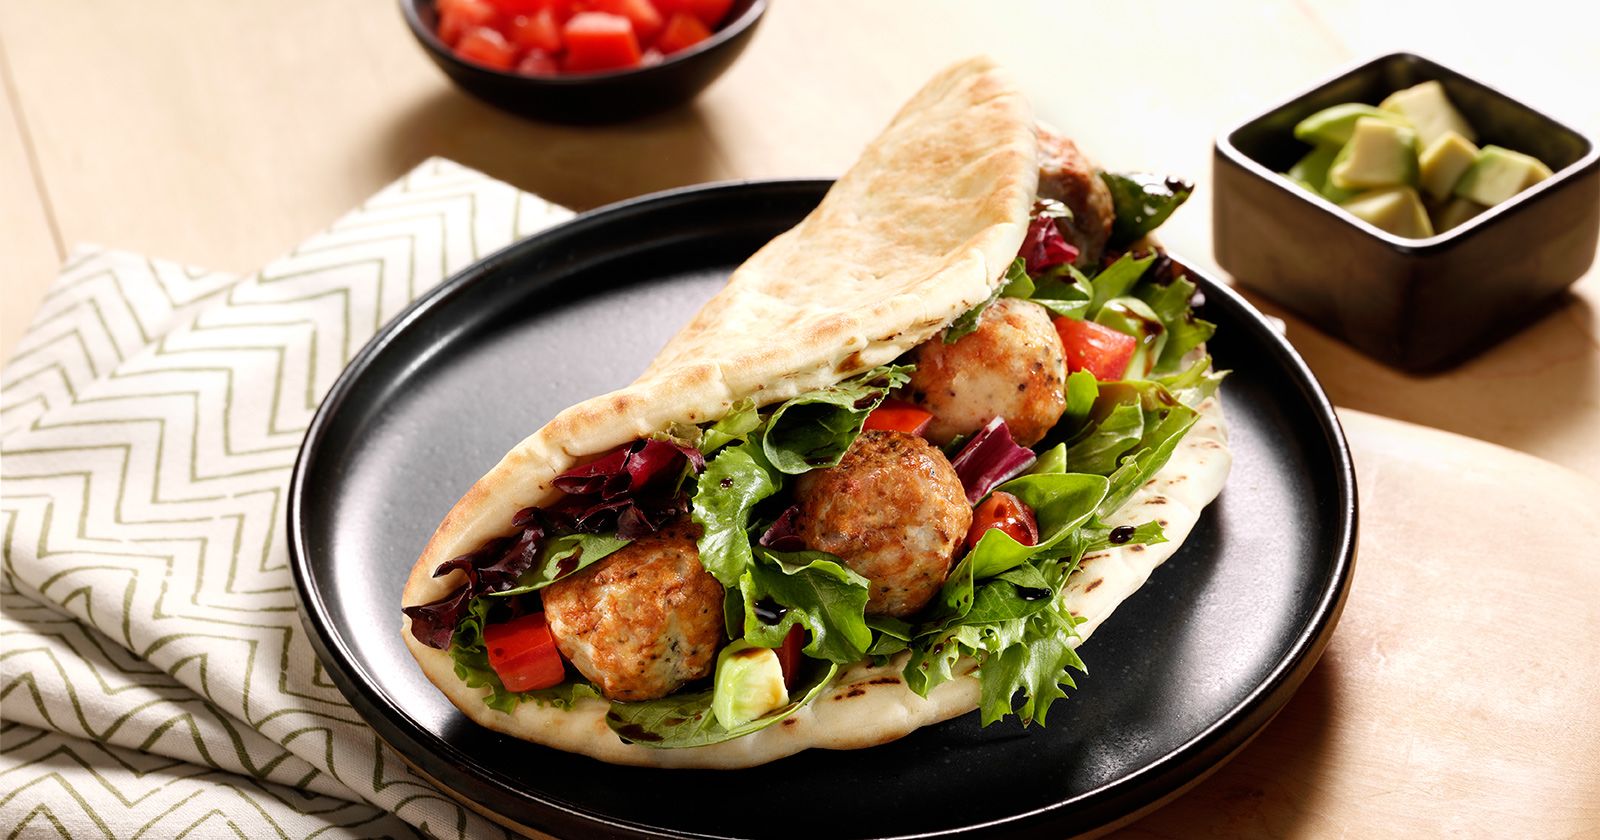 home market foods cooked perfect fully cooked fresh meatballs with pita bread